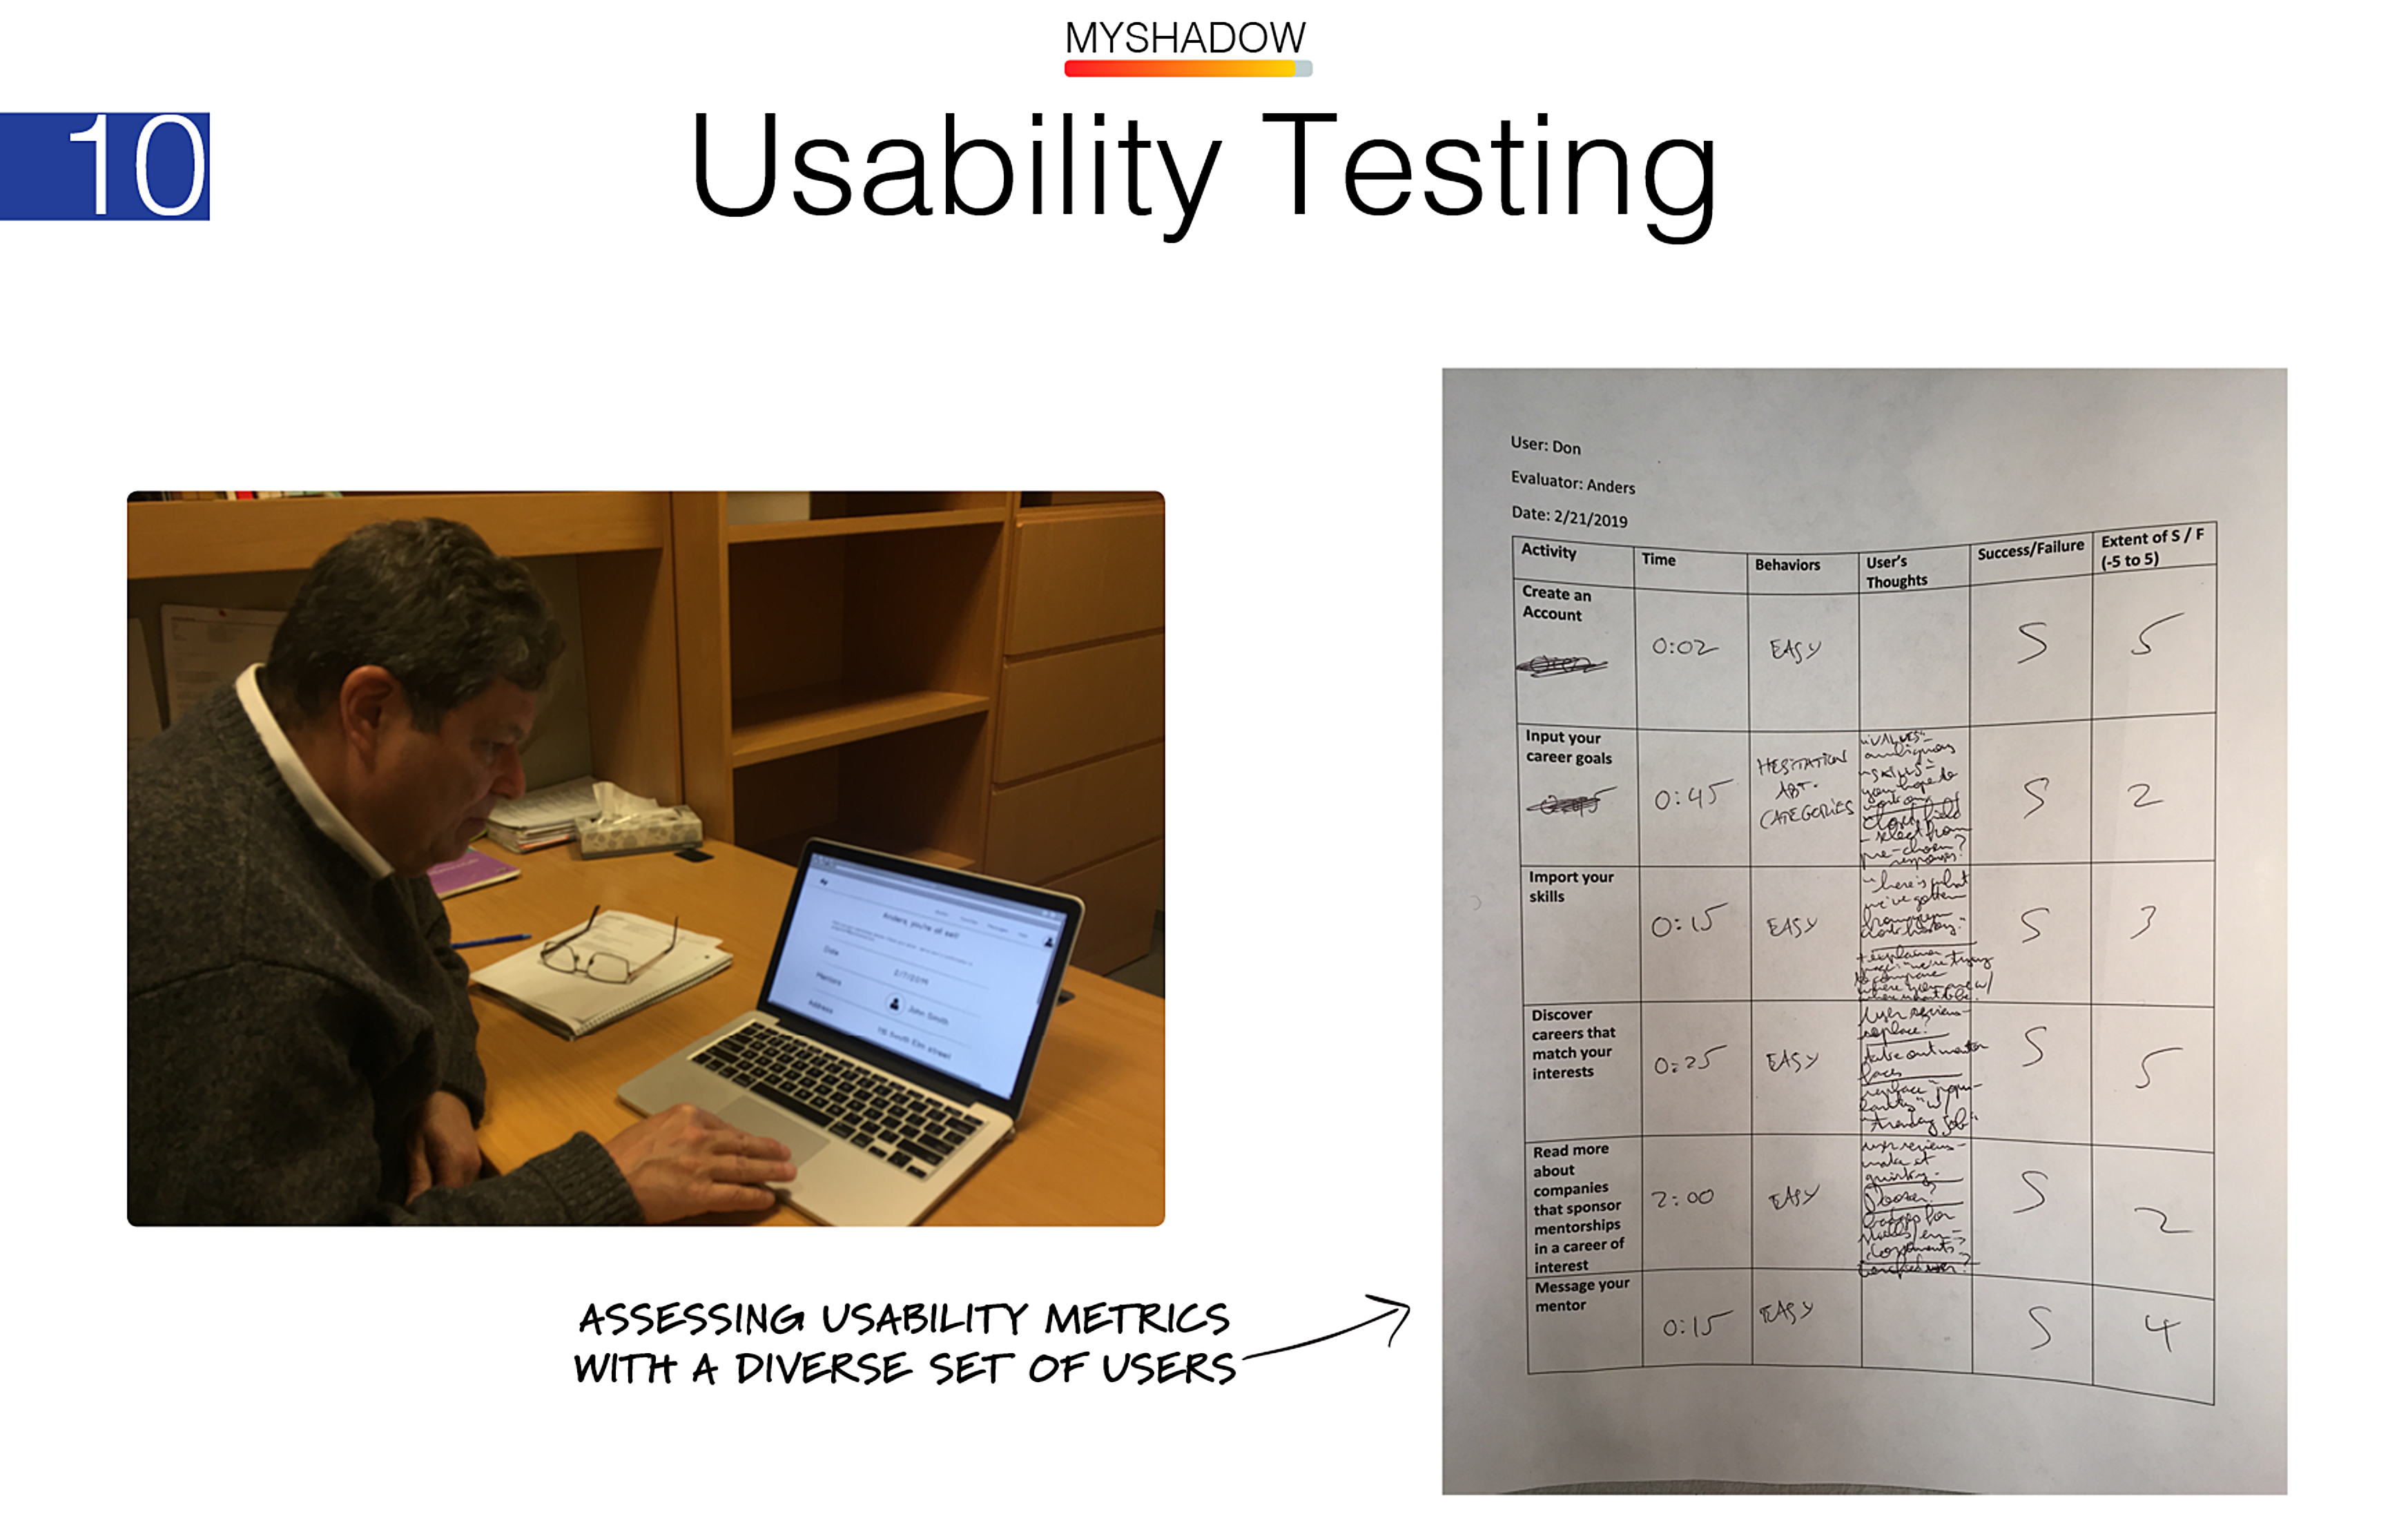 performing usability testing with test users to highlight any pain points in our design before iterating a new round of prototypes